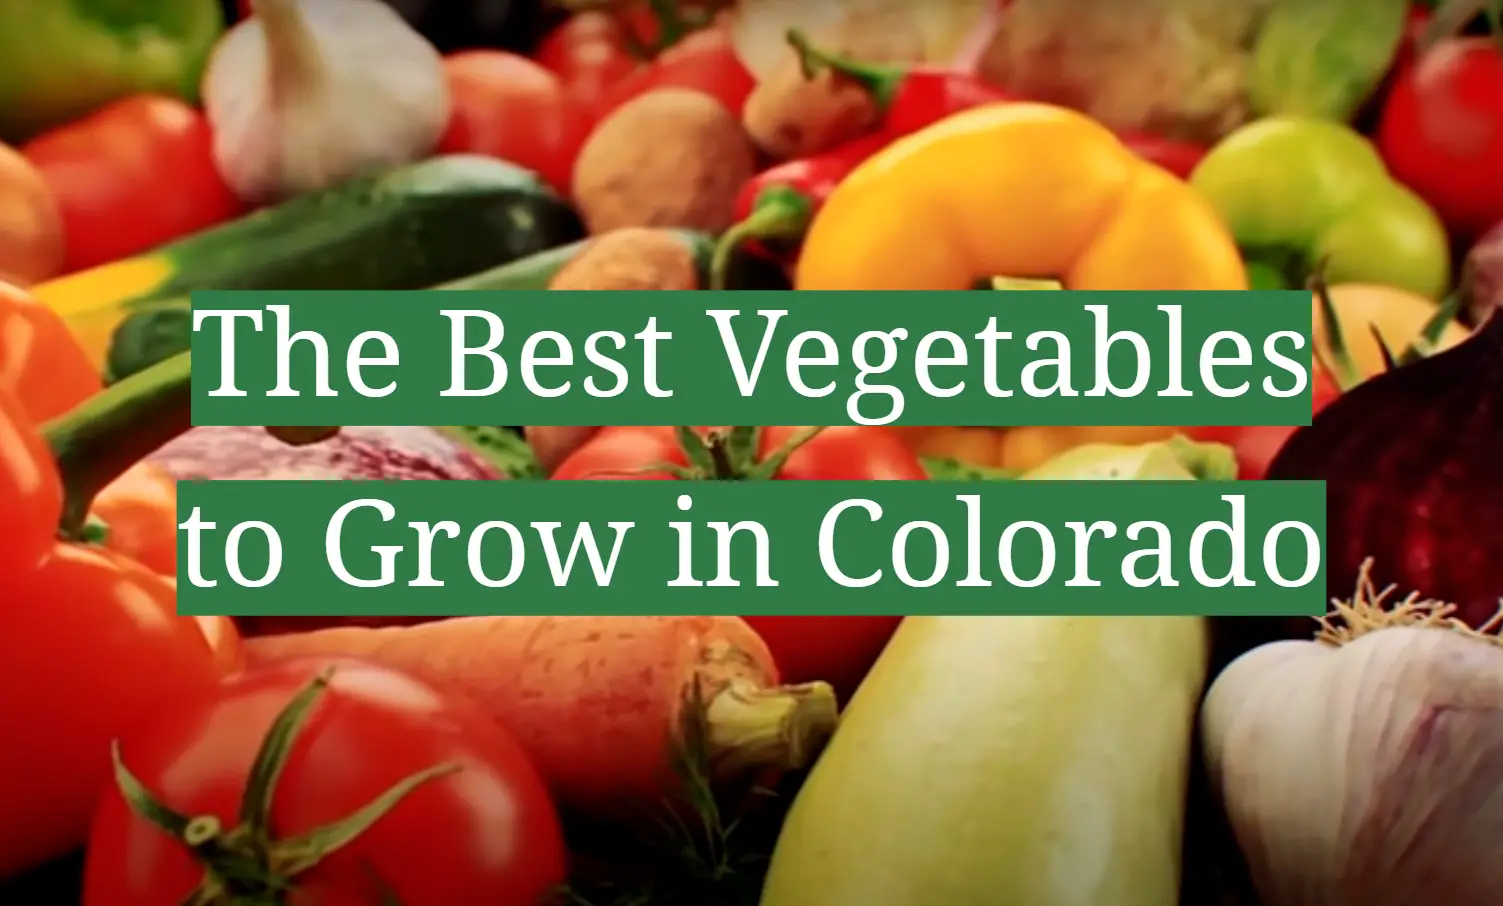 The Best Vegetables to Grow in Colorado